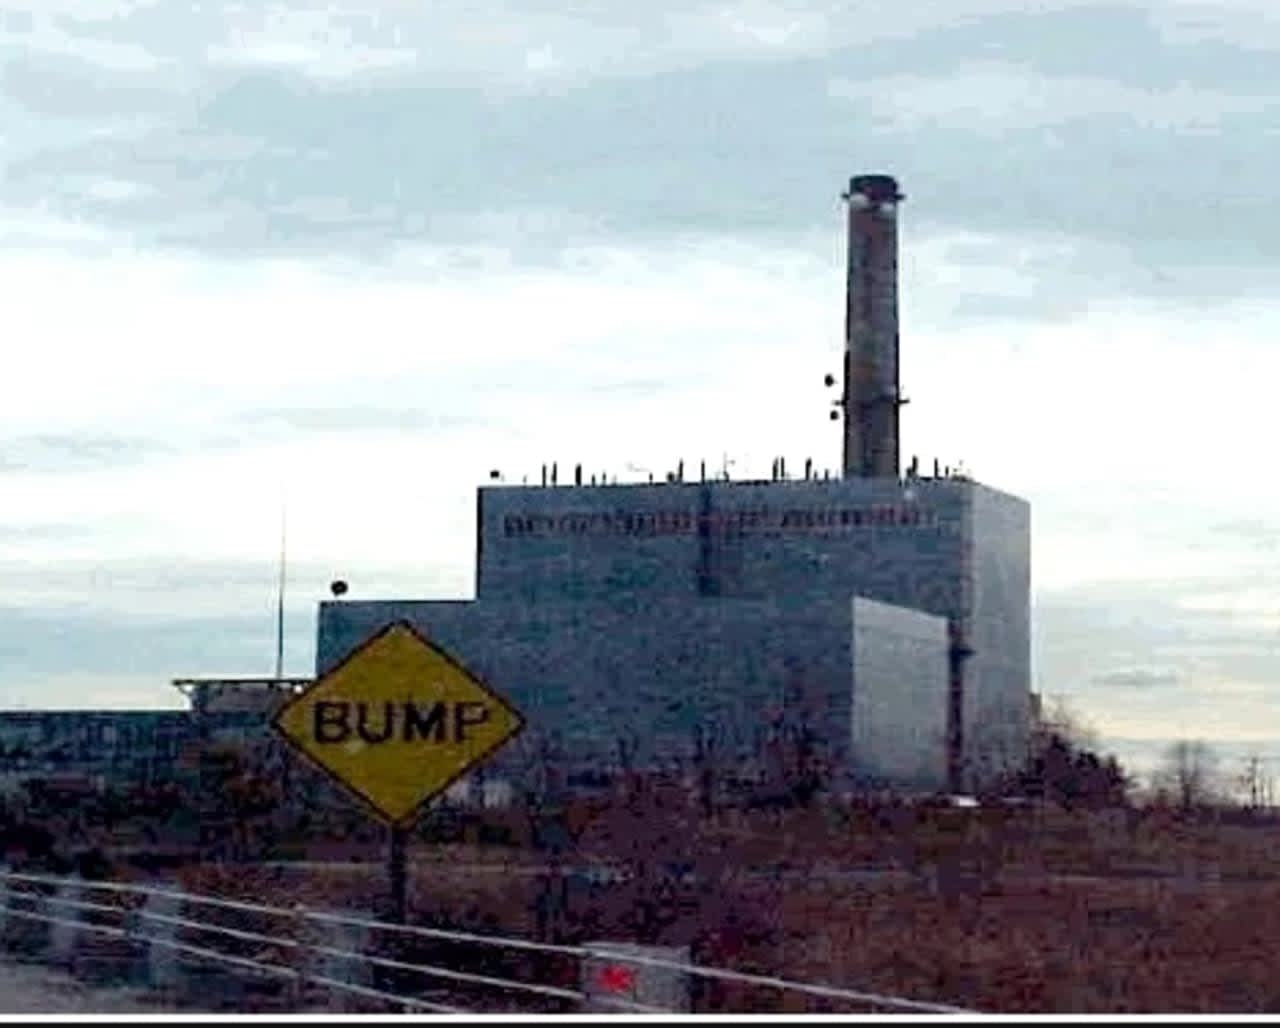 A public forum on the Manresa Island power plant will be held June 15.